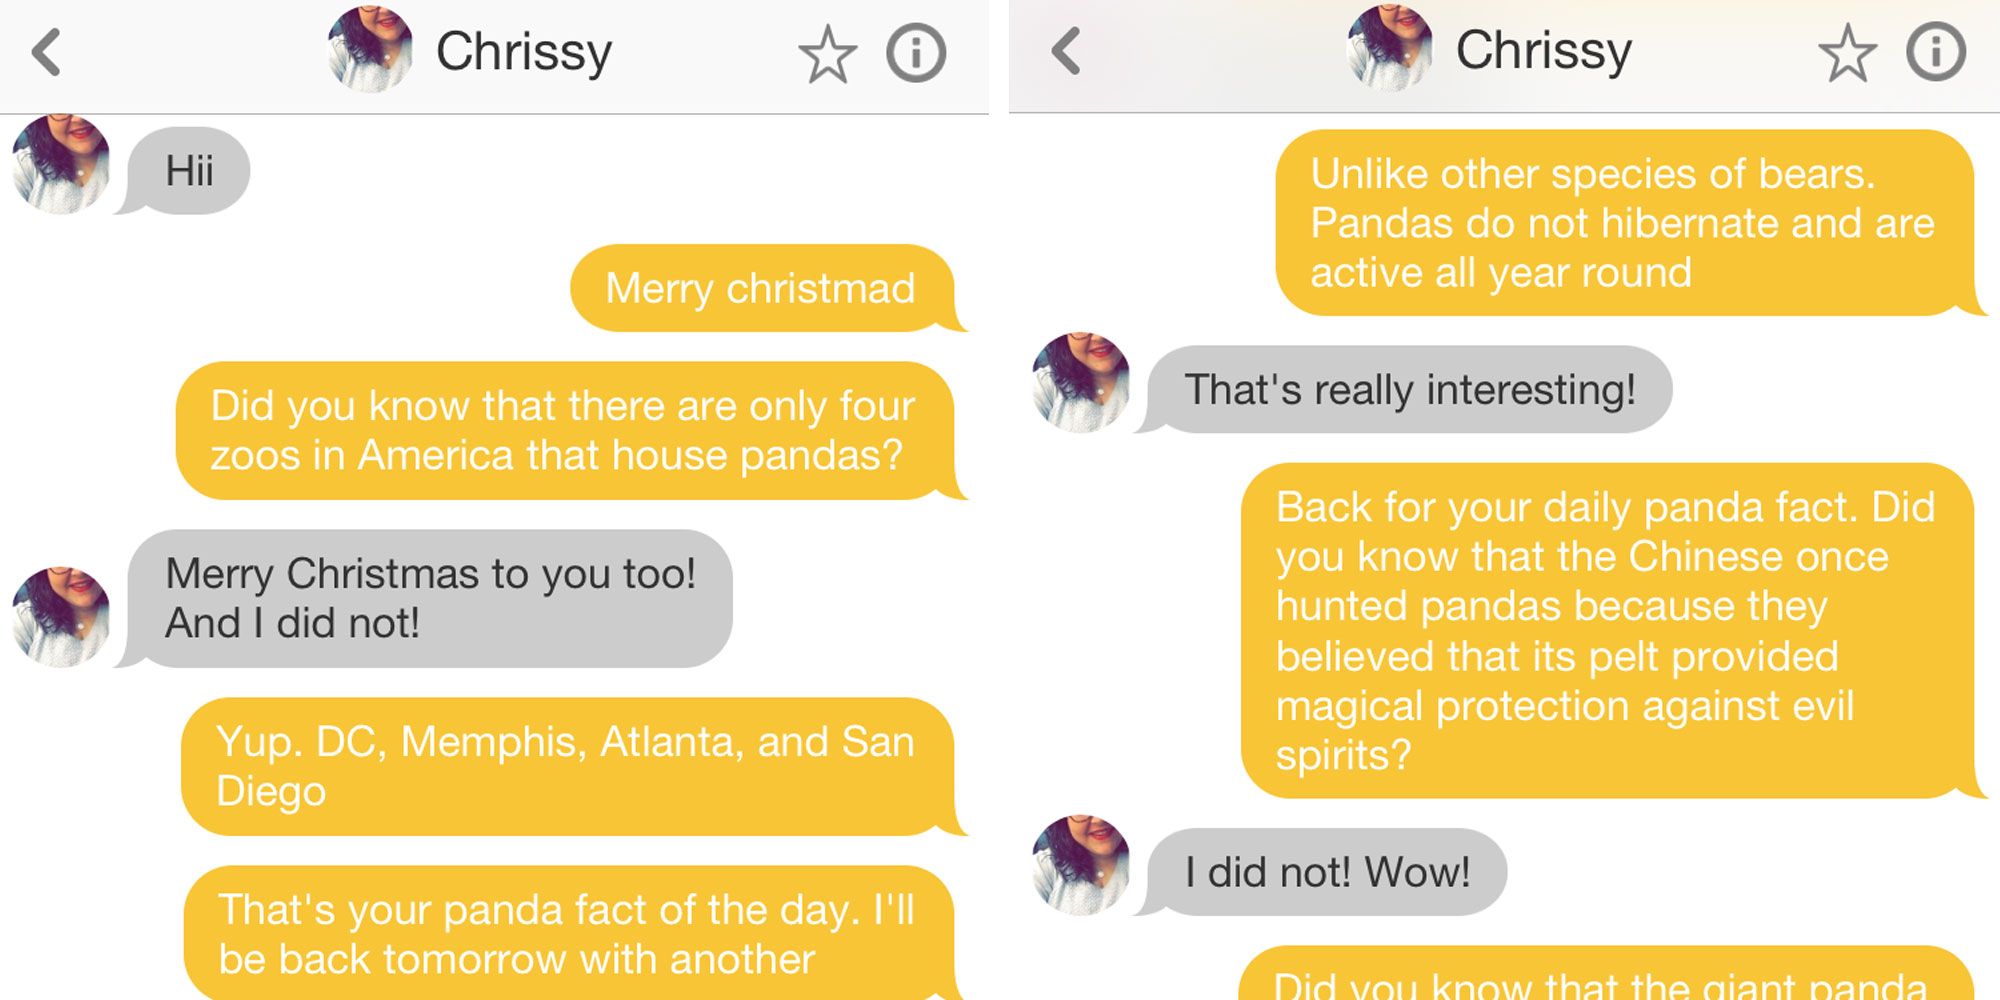 Should you use Tinder while travelling? 10 Pros and Cons of Tindering Abroad